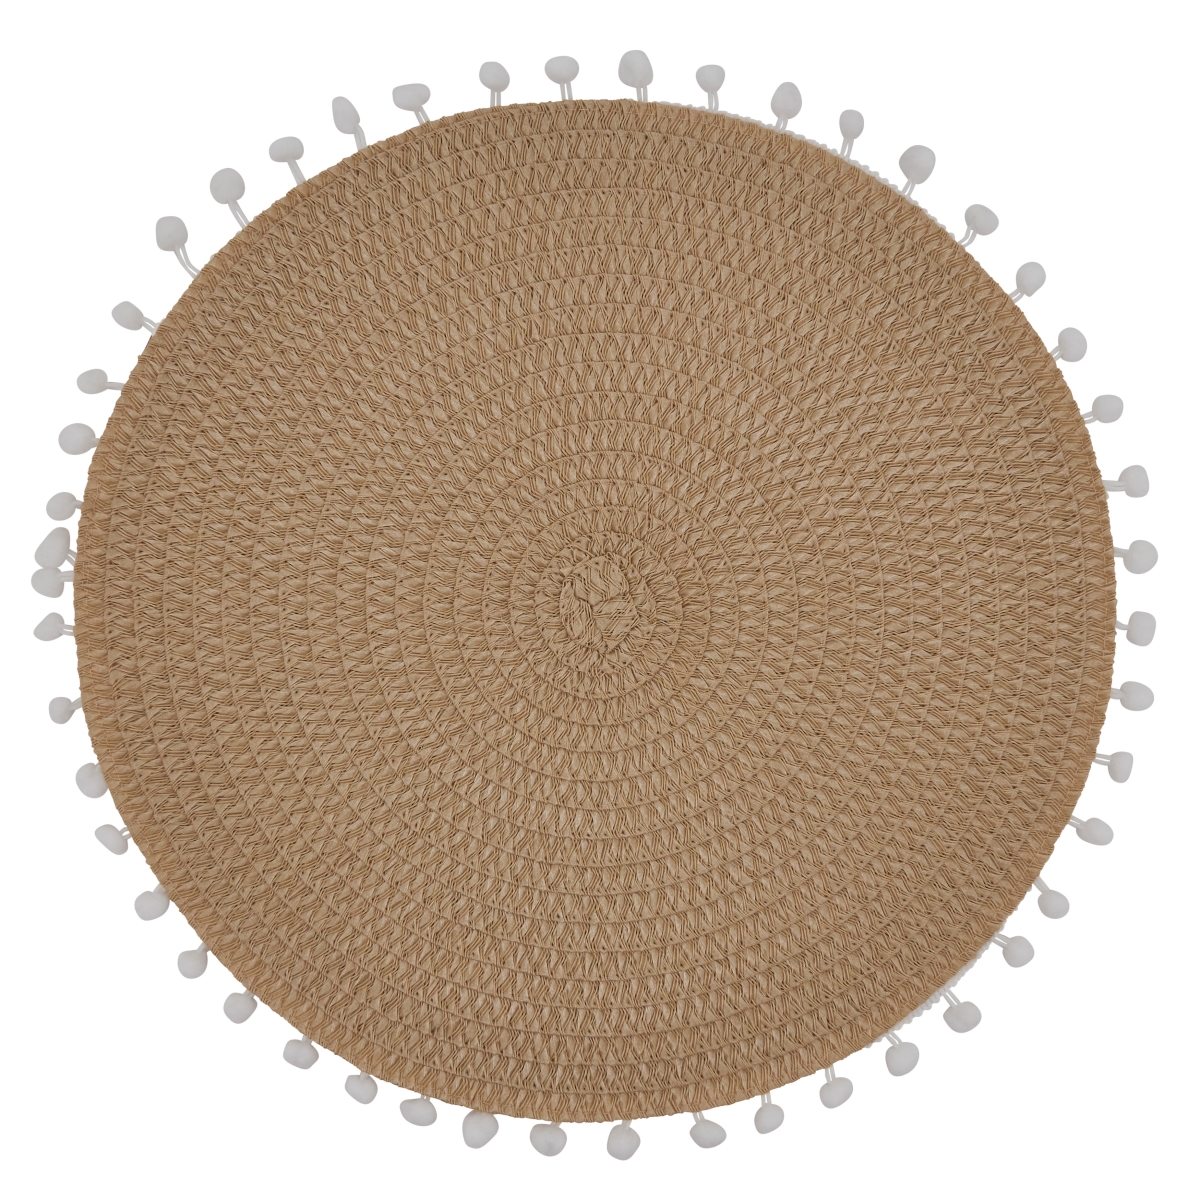 Cookhouse SARO  15 in. Round Pom Pom Design Placemats  Natural - Set of 4